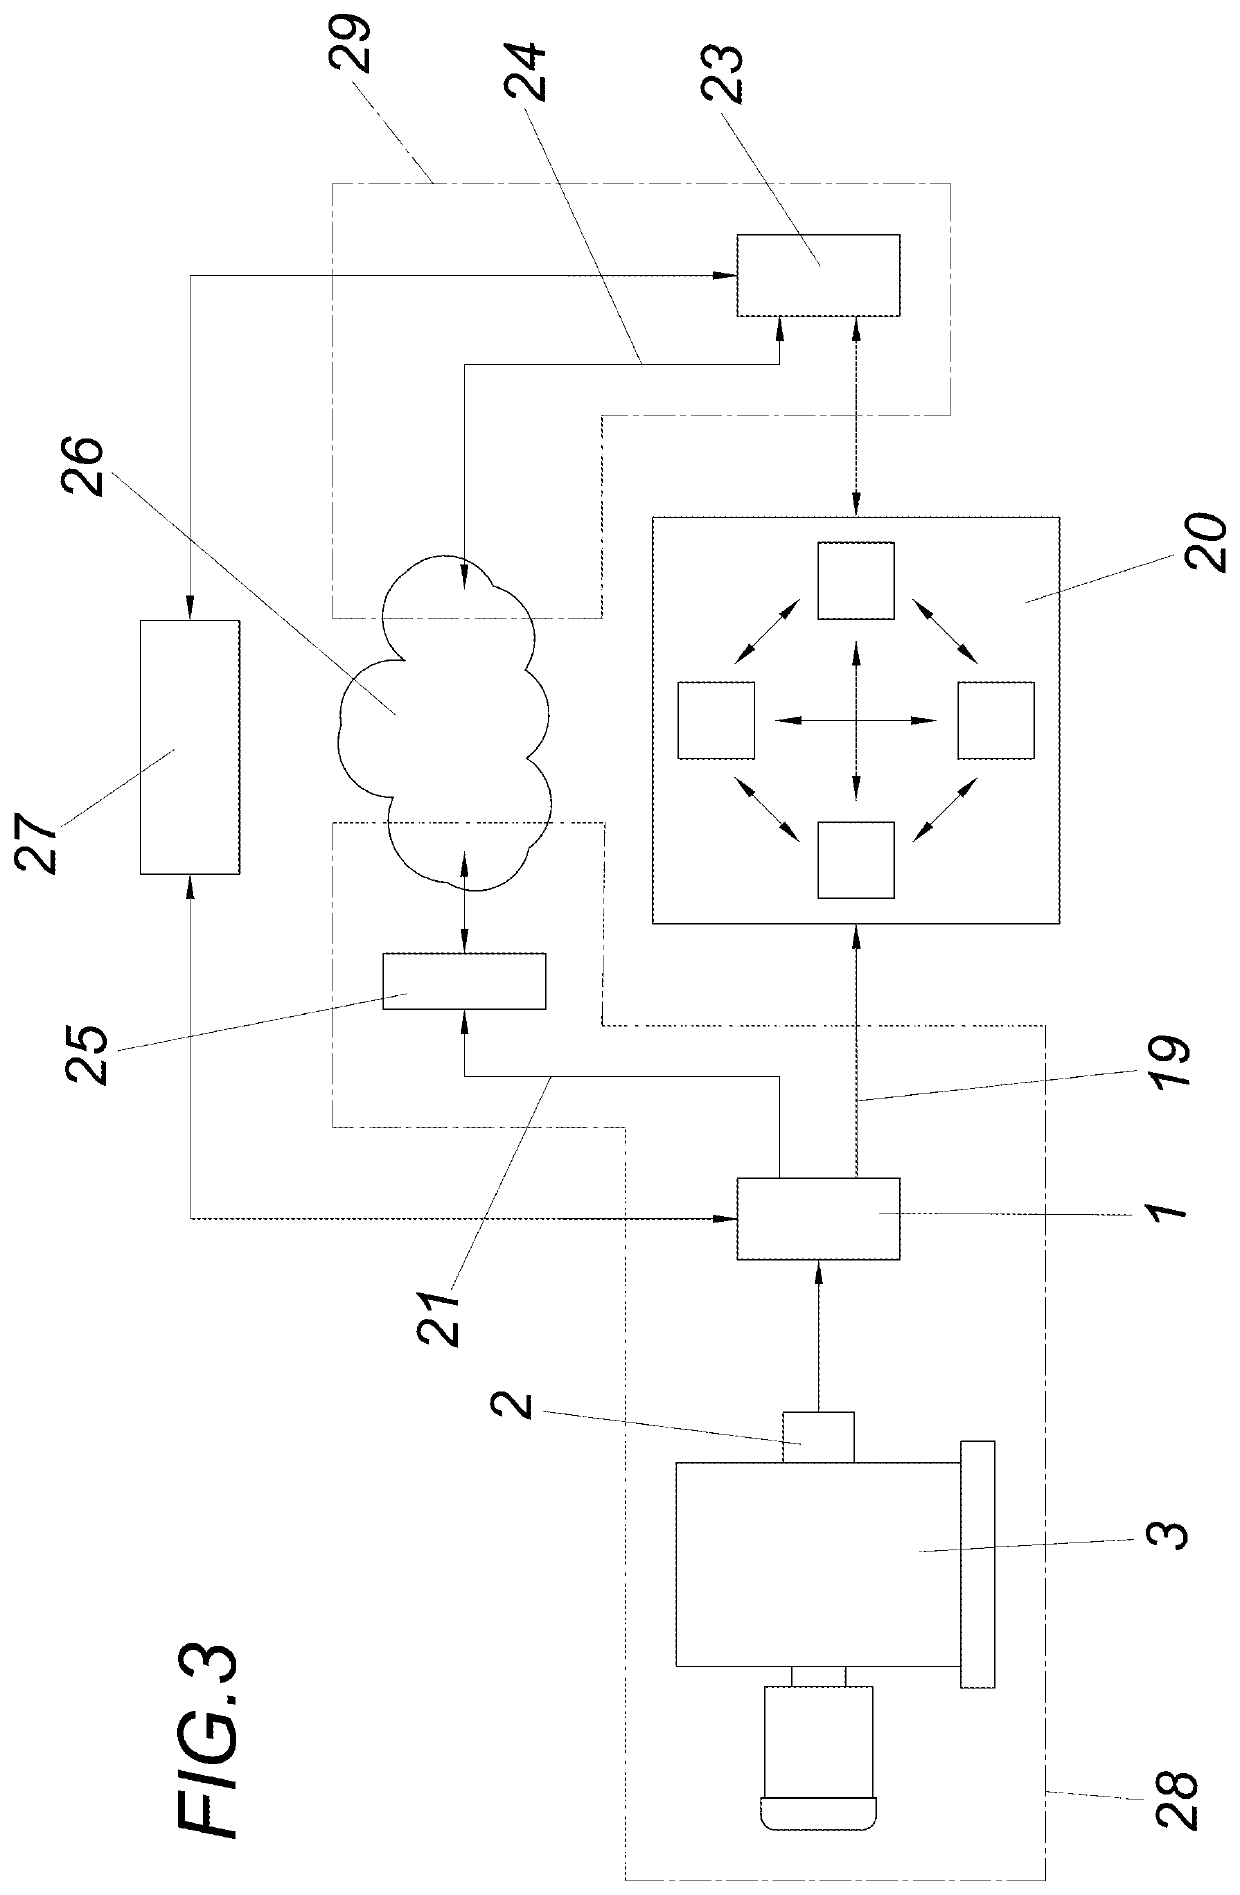 Apparatus and method for checking the integrity of sensor-data streams